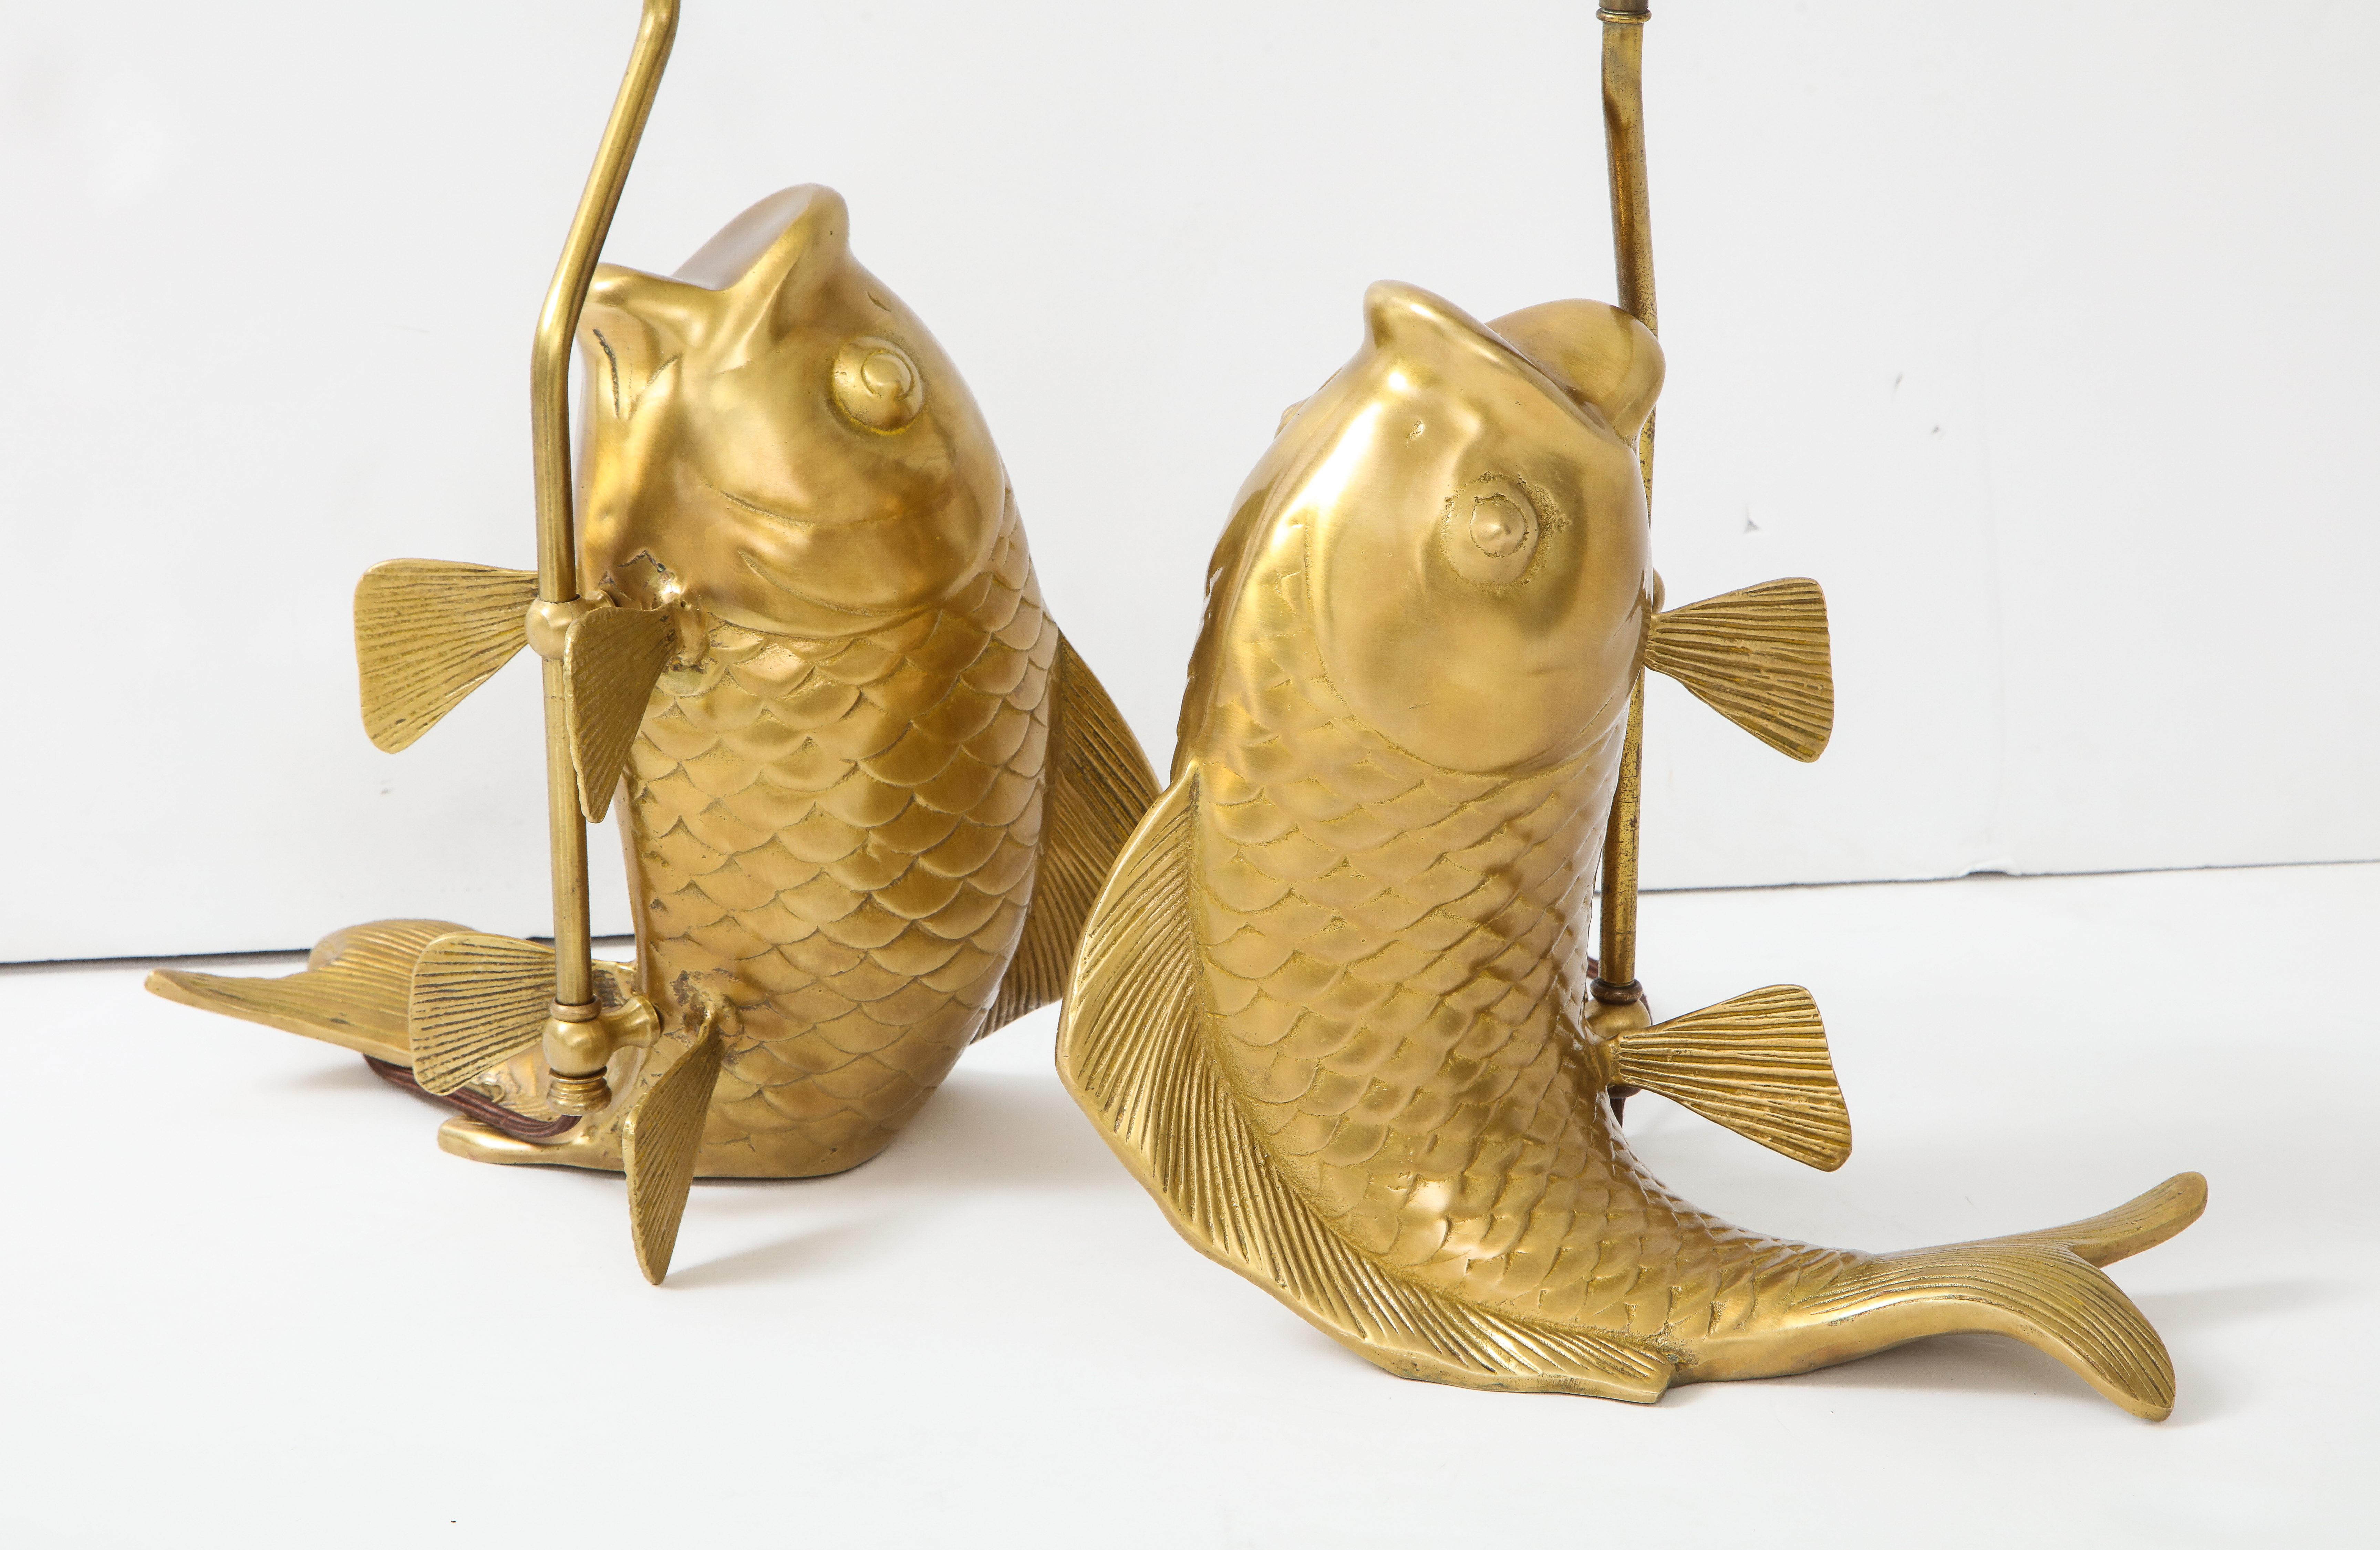 Satin Brass Koi Fish Lamps In Excellent Condition For Sale In New York, NY